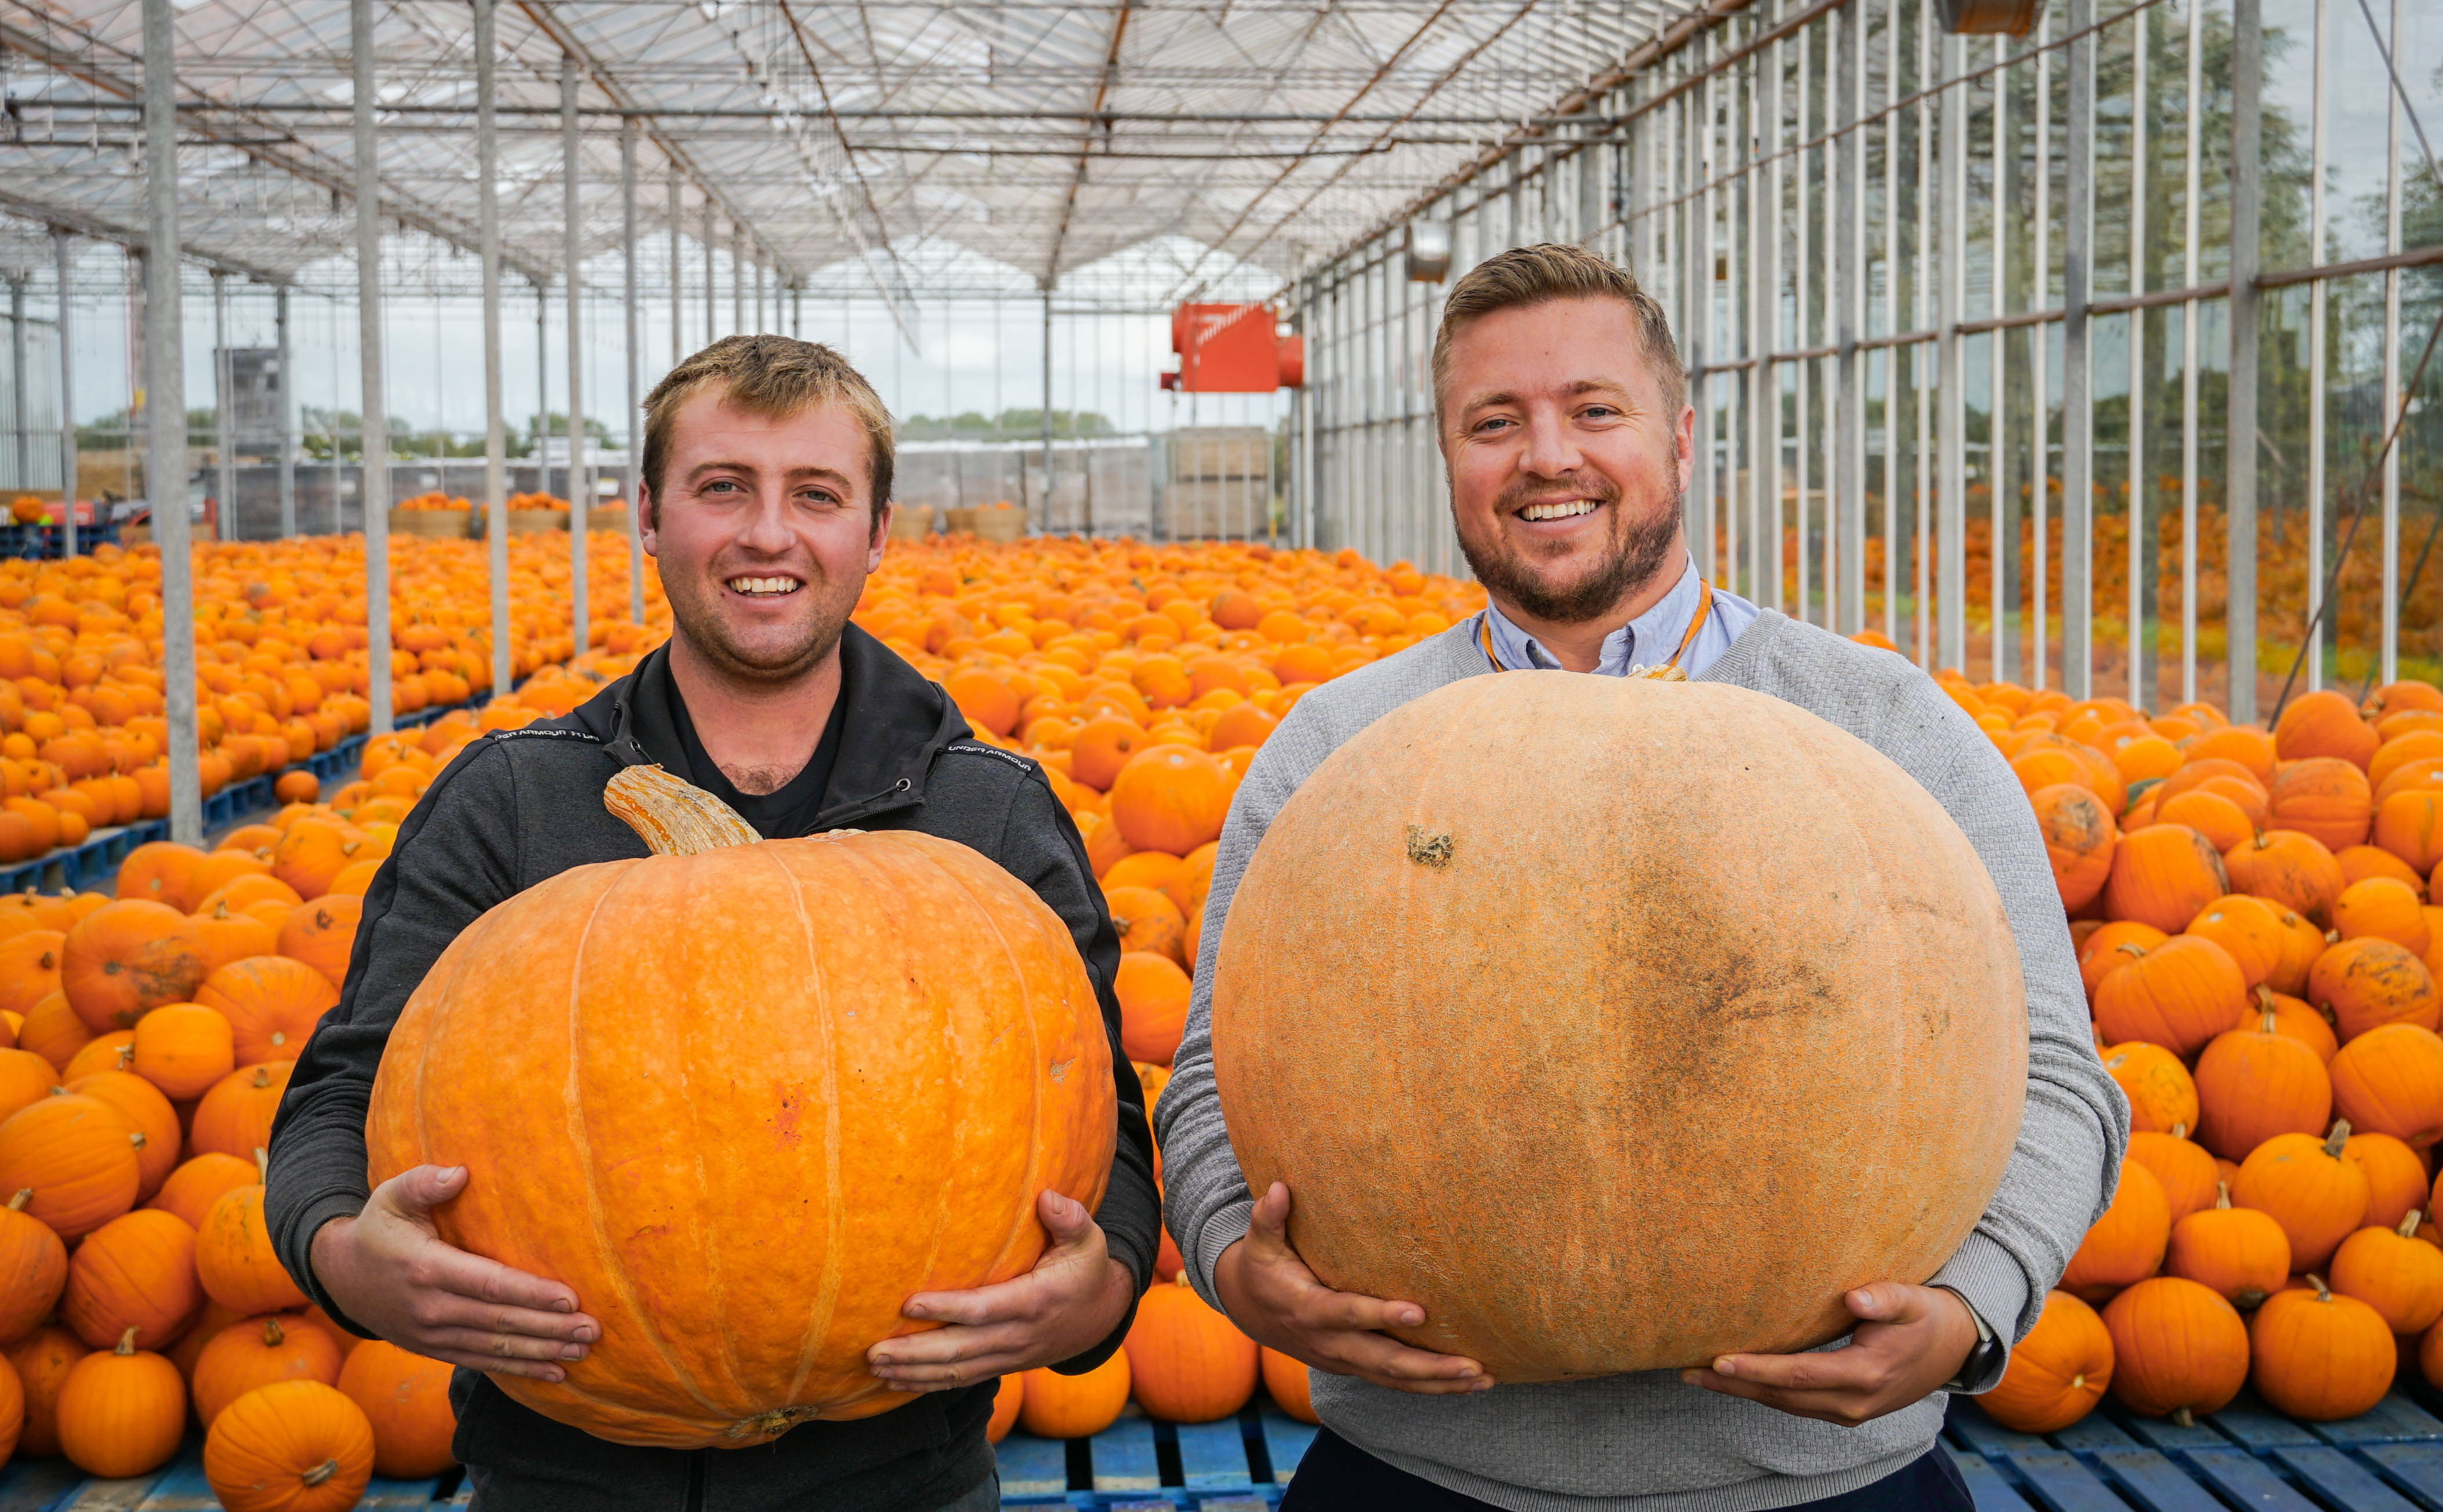 Pumpkins aplenty as James Hall & Co. Ltd supports Lancashire growers T&E Forshaw ahead of Halloween